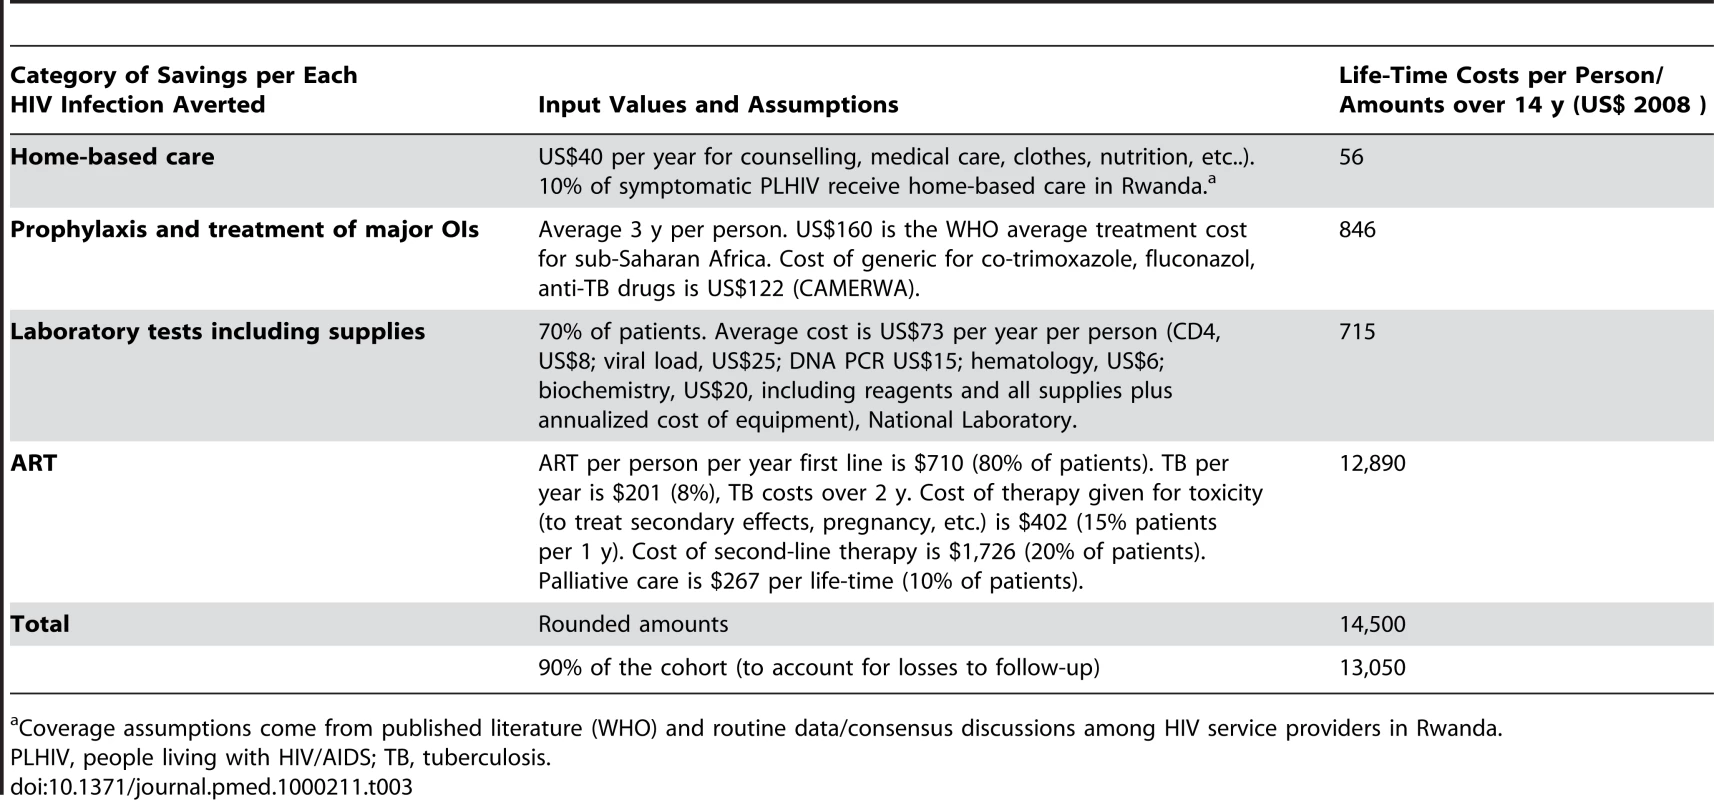 Life-time savings per each HIV infection averted.